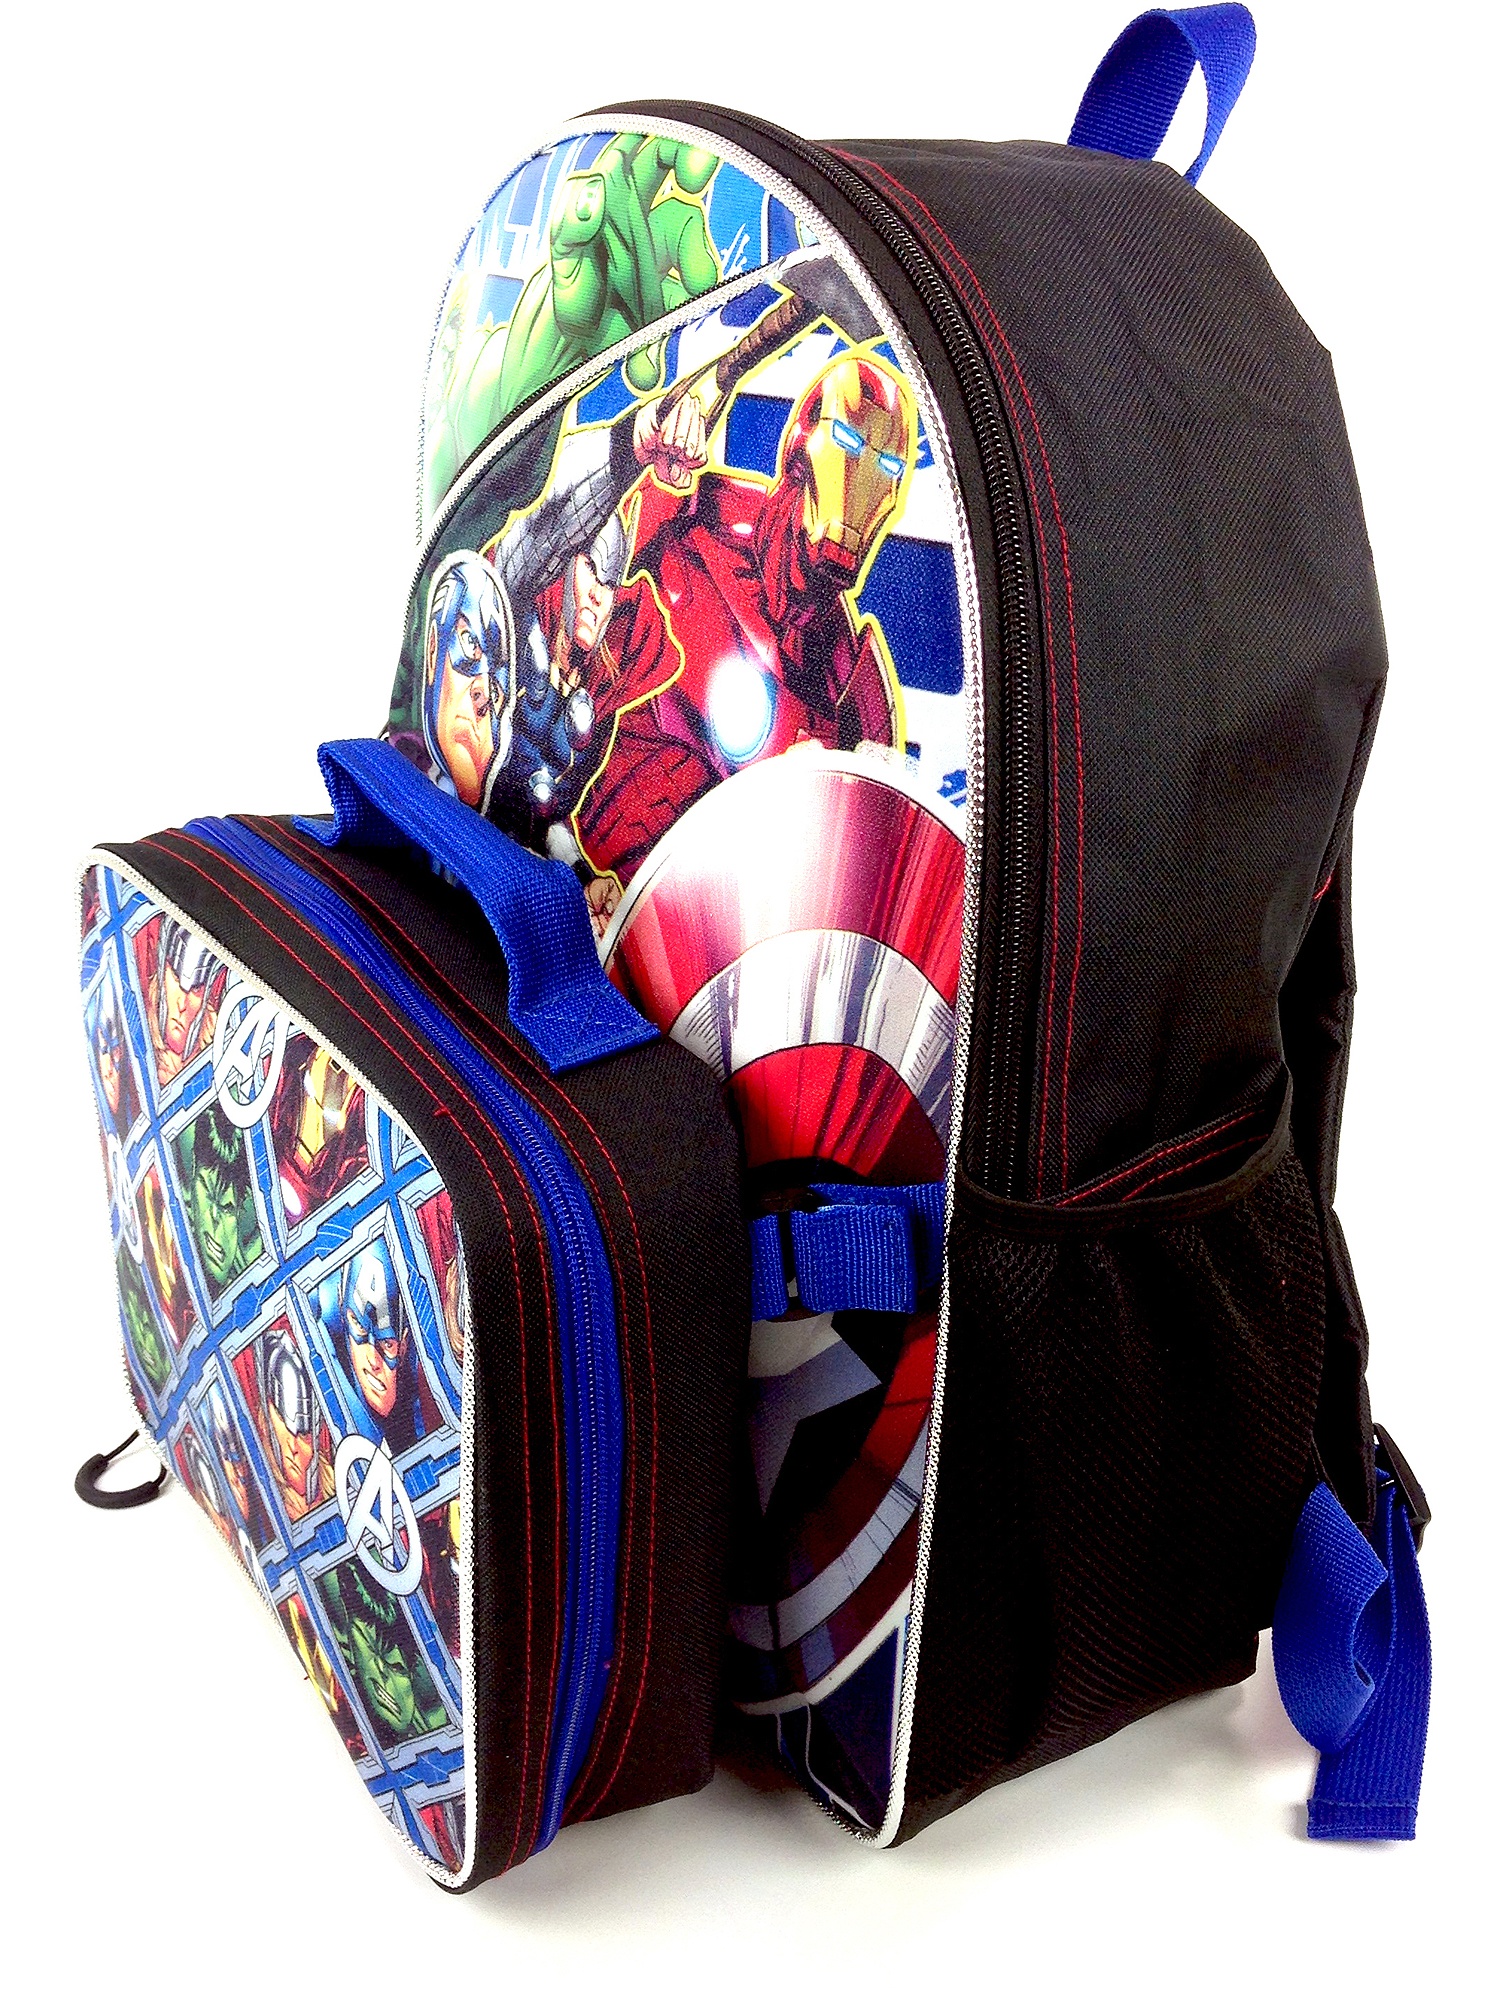 Marvel Avengers 16" Backpacks with Lunch Kit - image 3 of 3